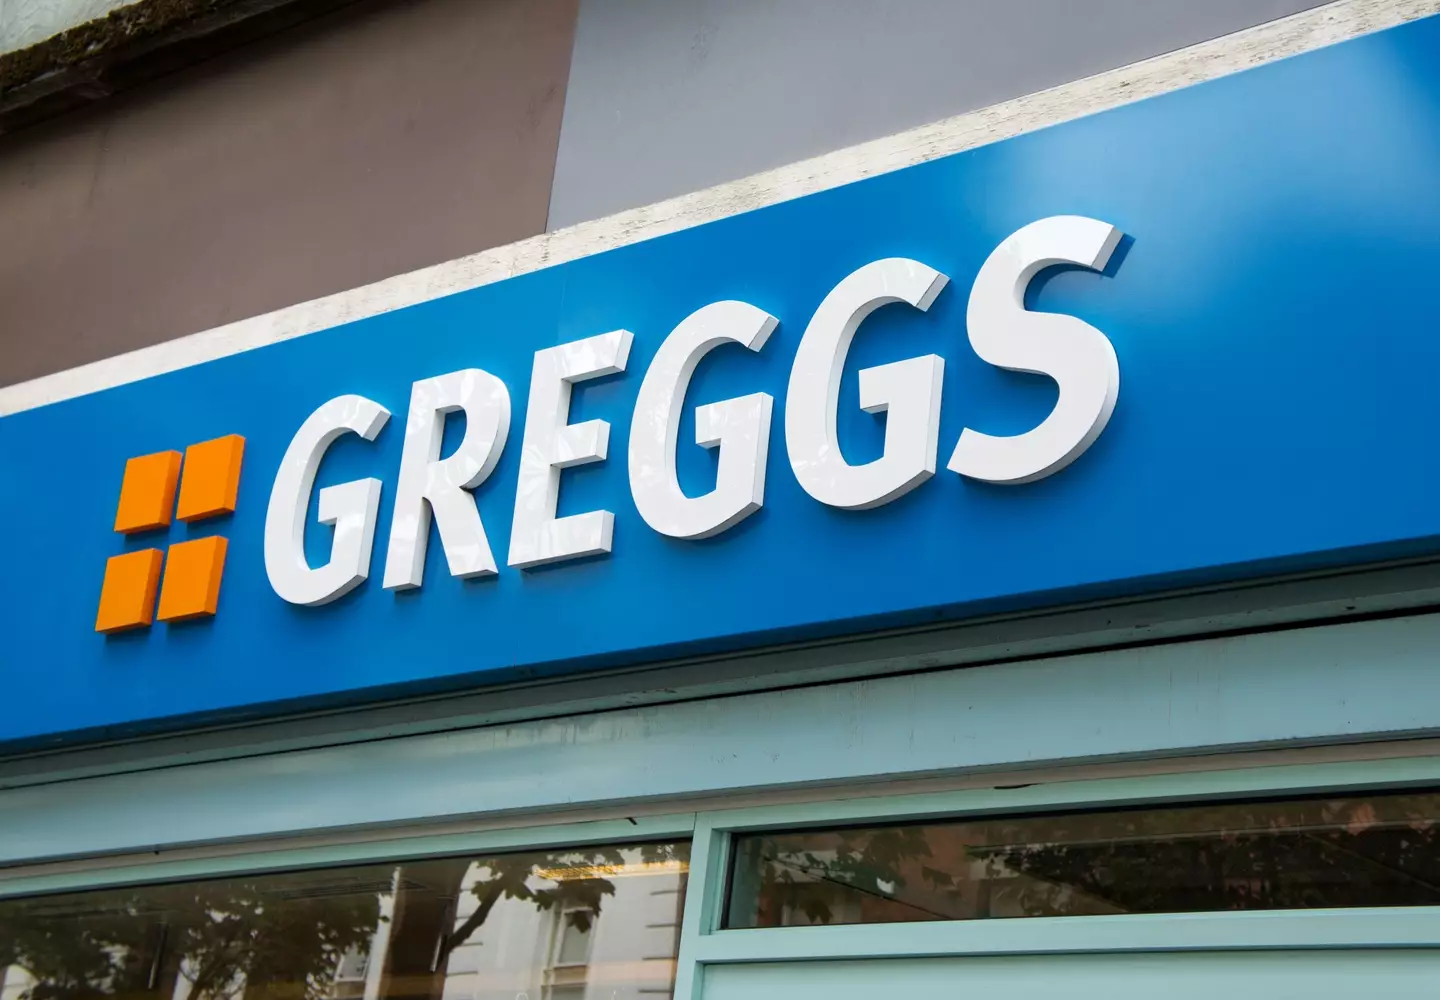 Greggs are now 'in the process of offering a full refund for all customers affected,' a representative stated.